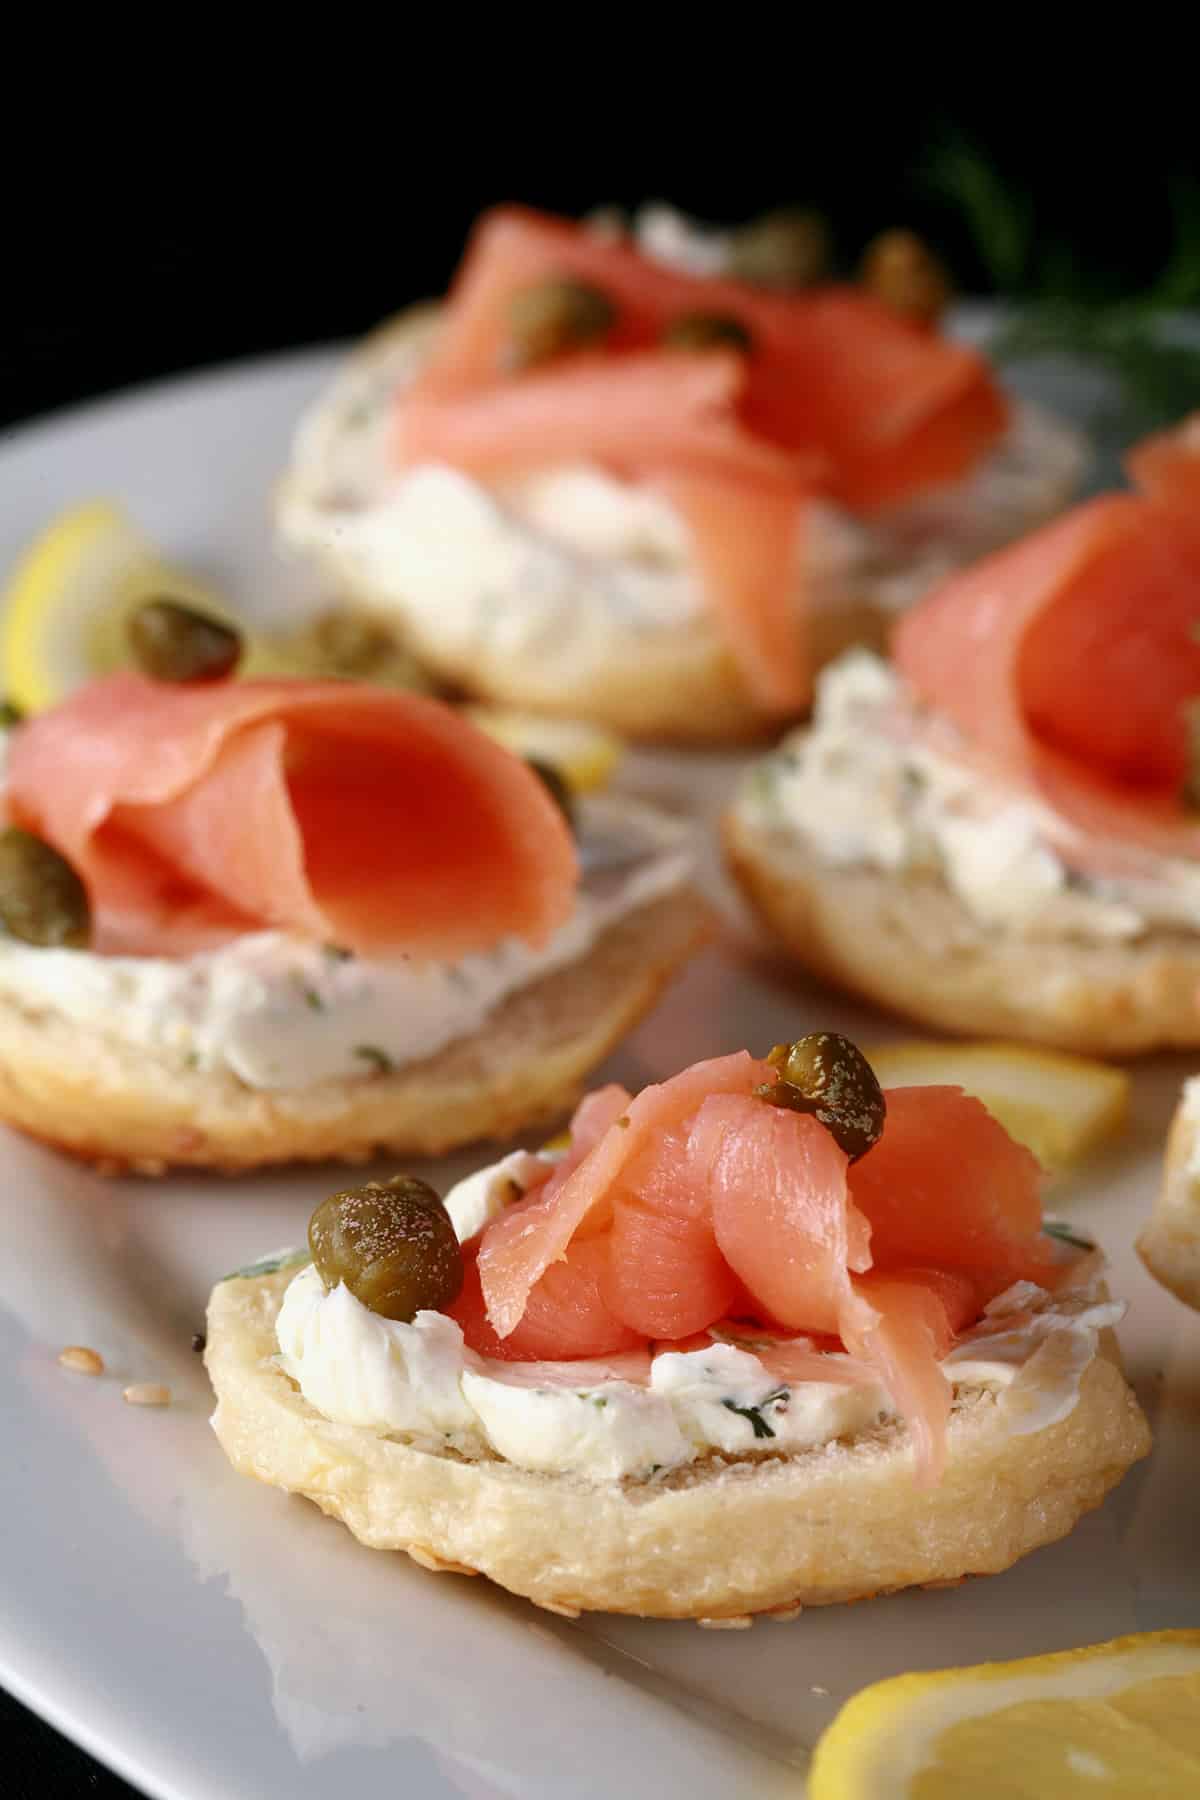 A platter of smoked salmon bagel bites garnished with capers and lemon slices.